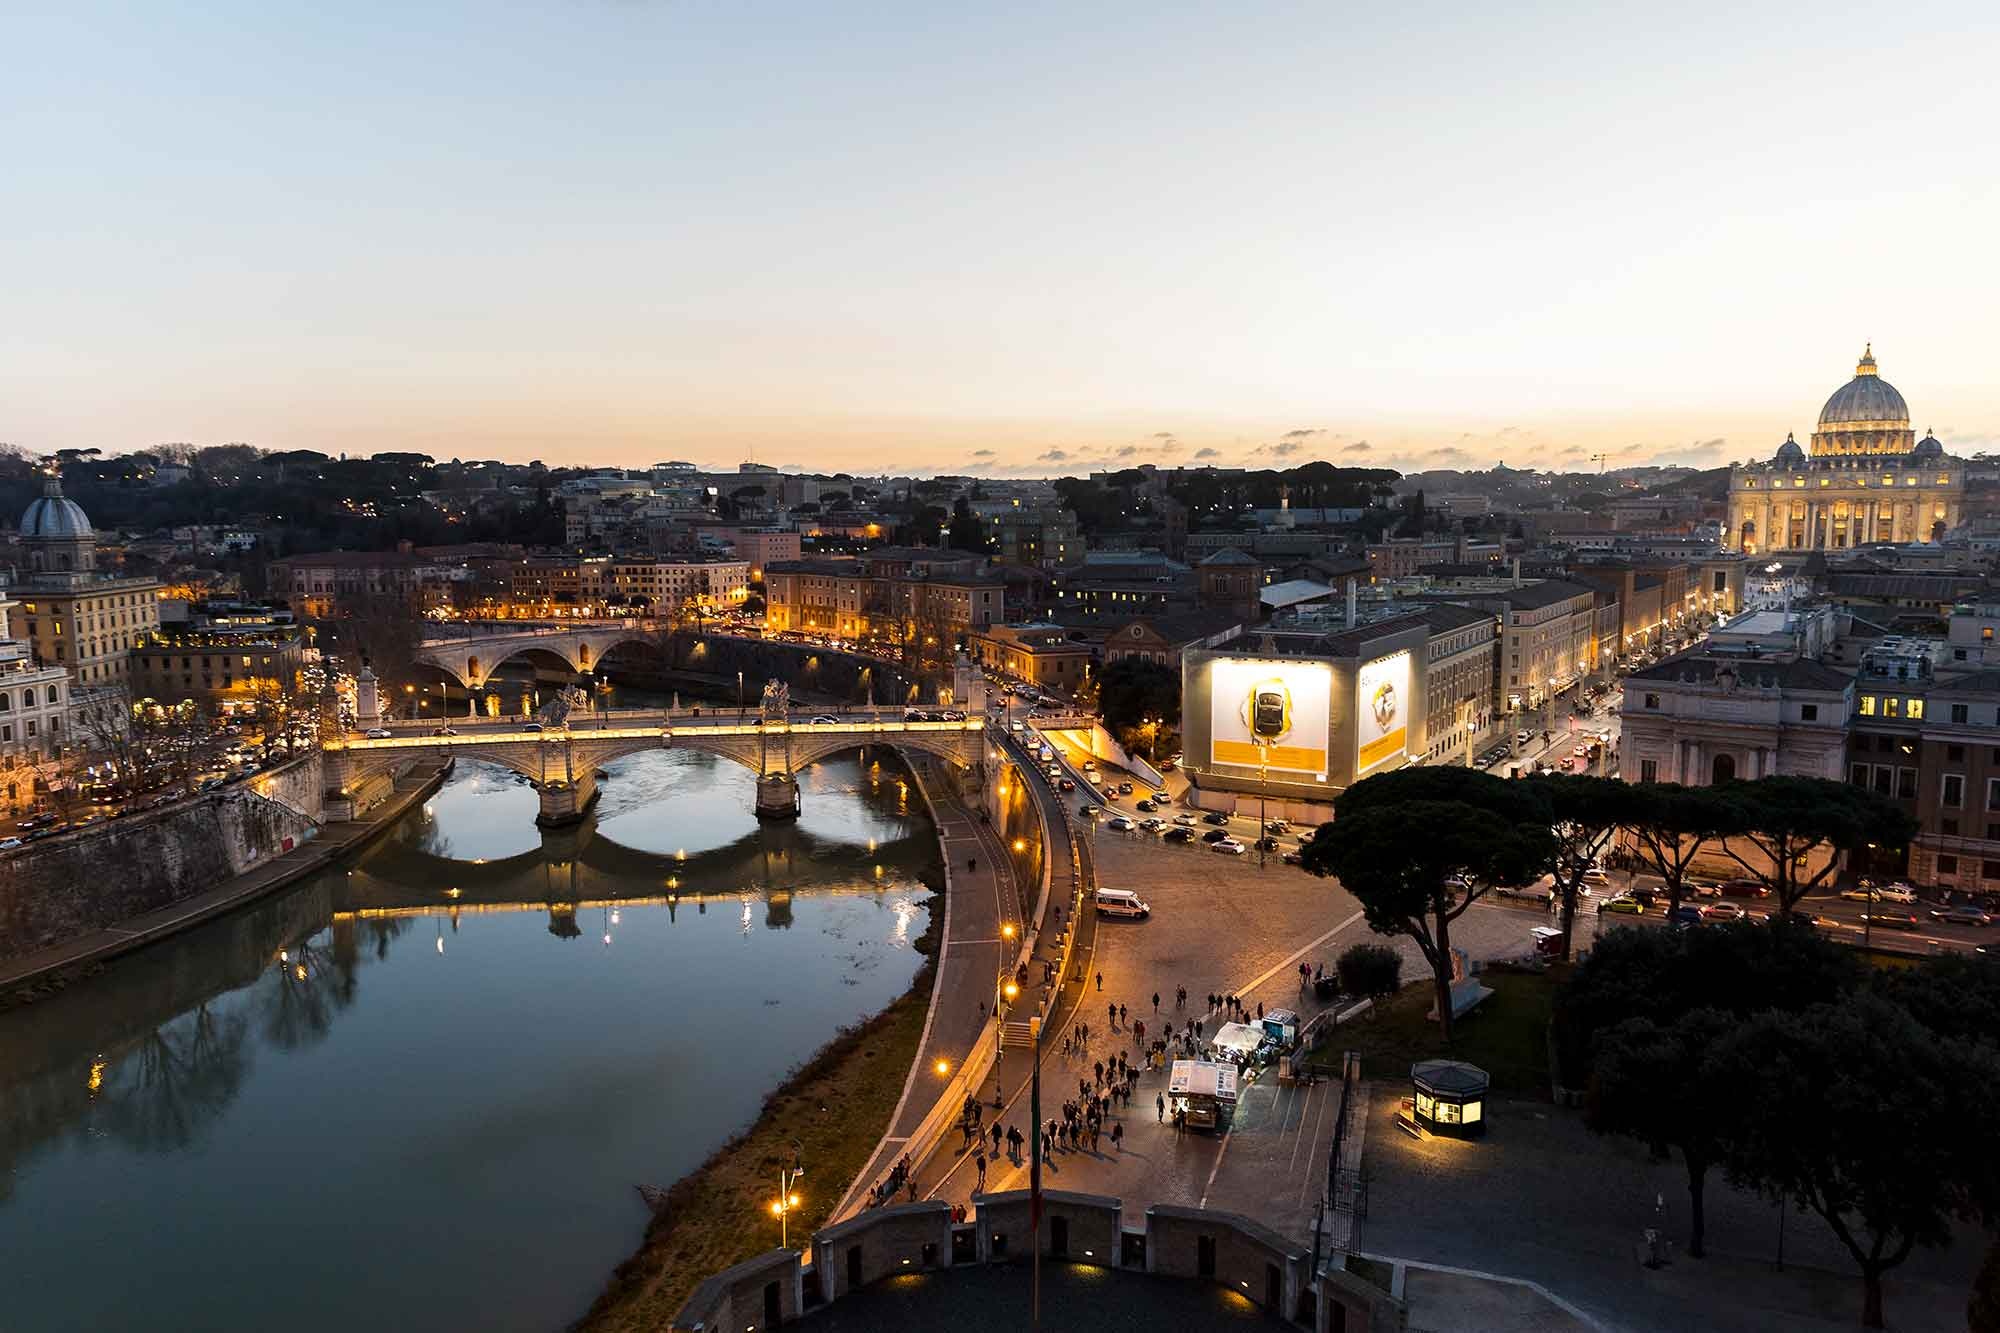 Rooftop bars in Rome, Post-covid update, Nightlife recommendations, City views, 2000x1340 HD Desktop